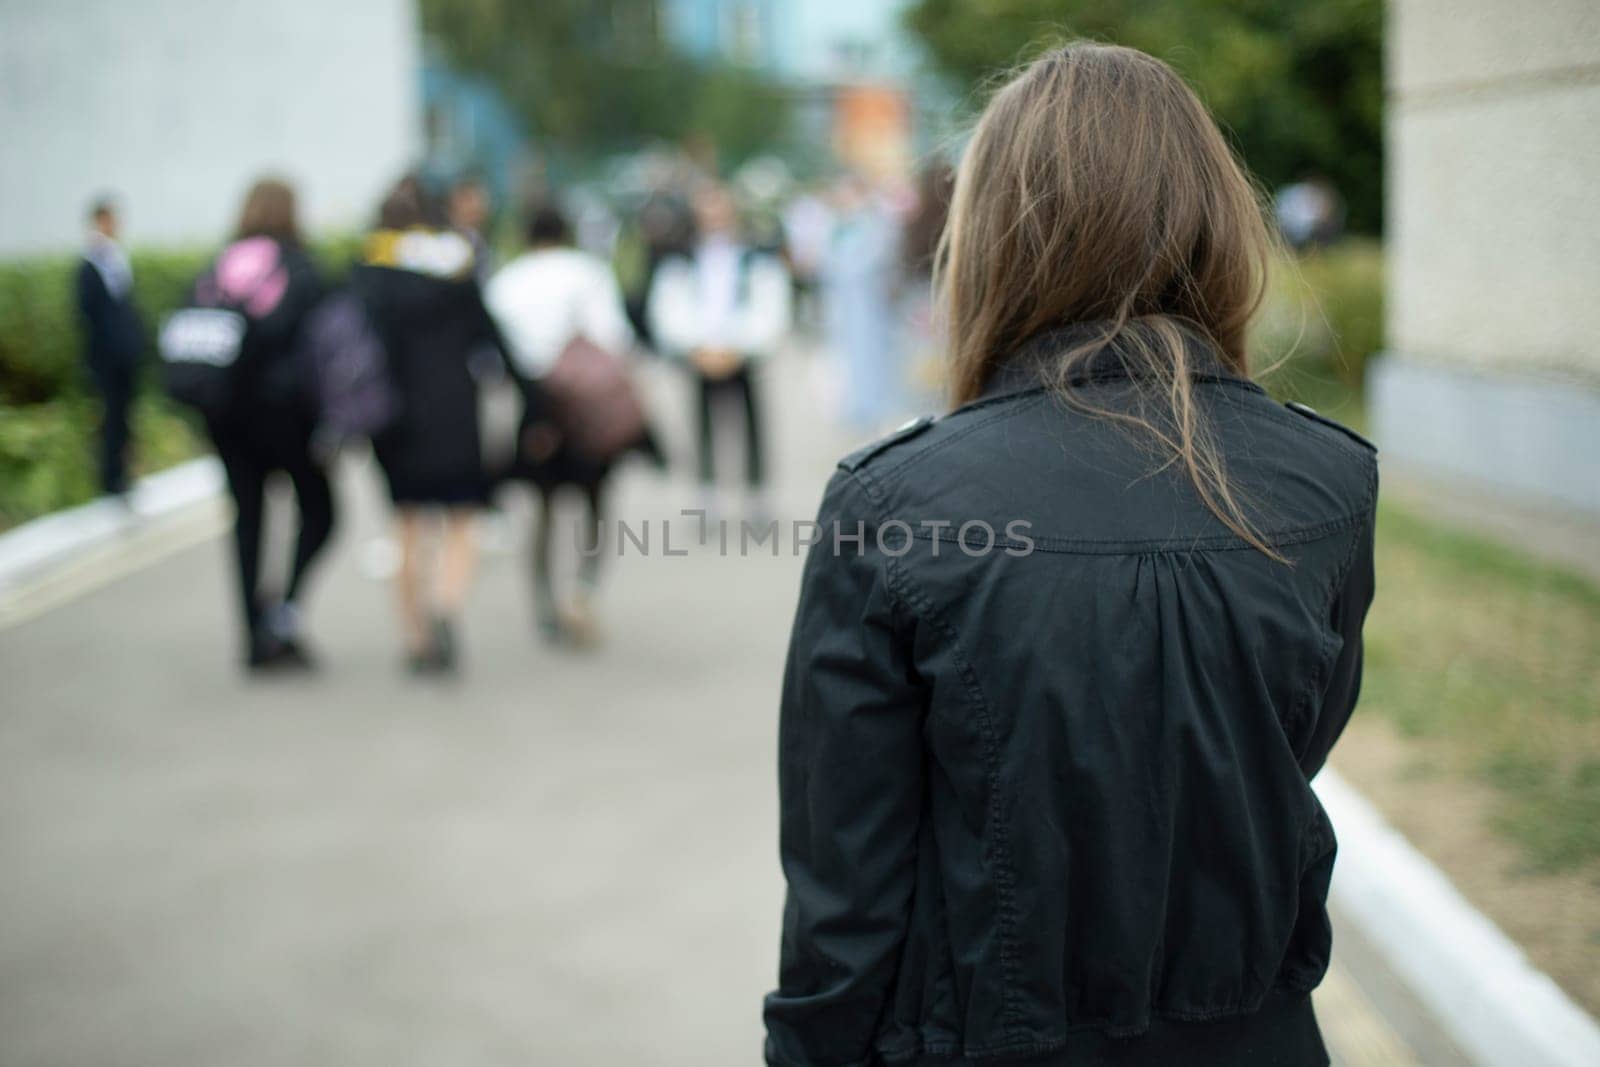 Girl in black jacket in schoolyard. Girl is coming home from school. Black clothes. Fashion details.